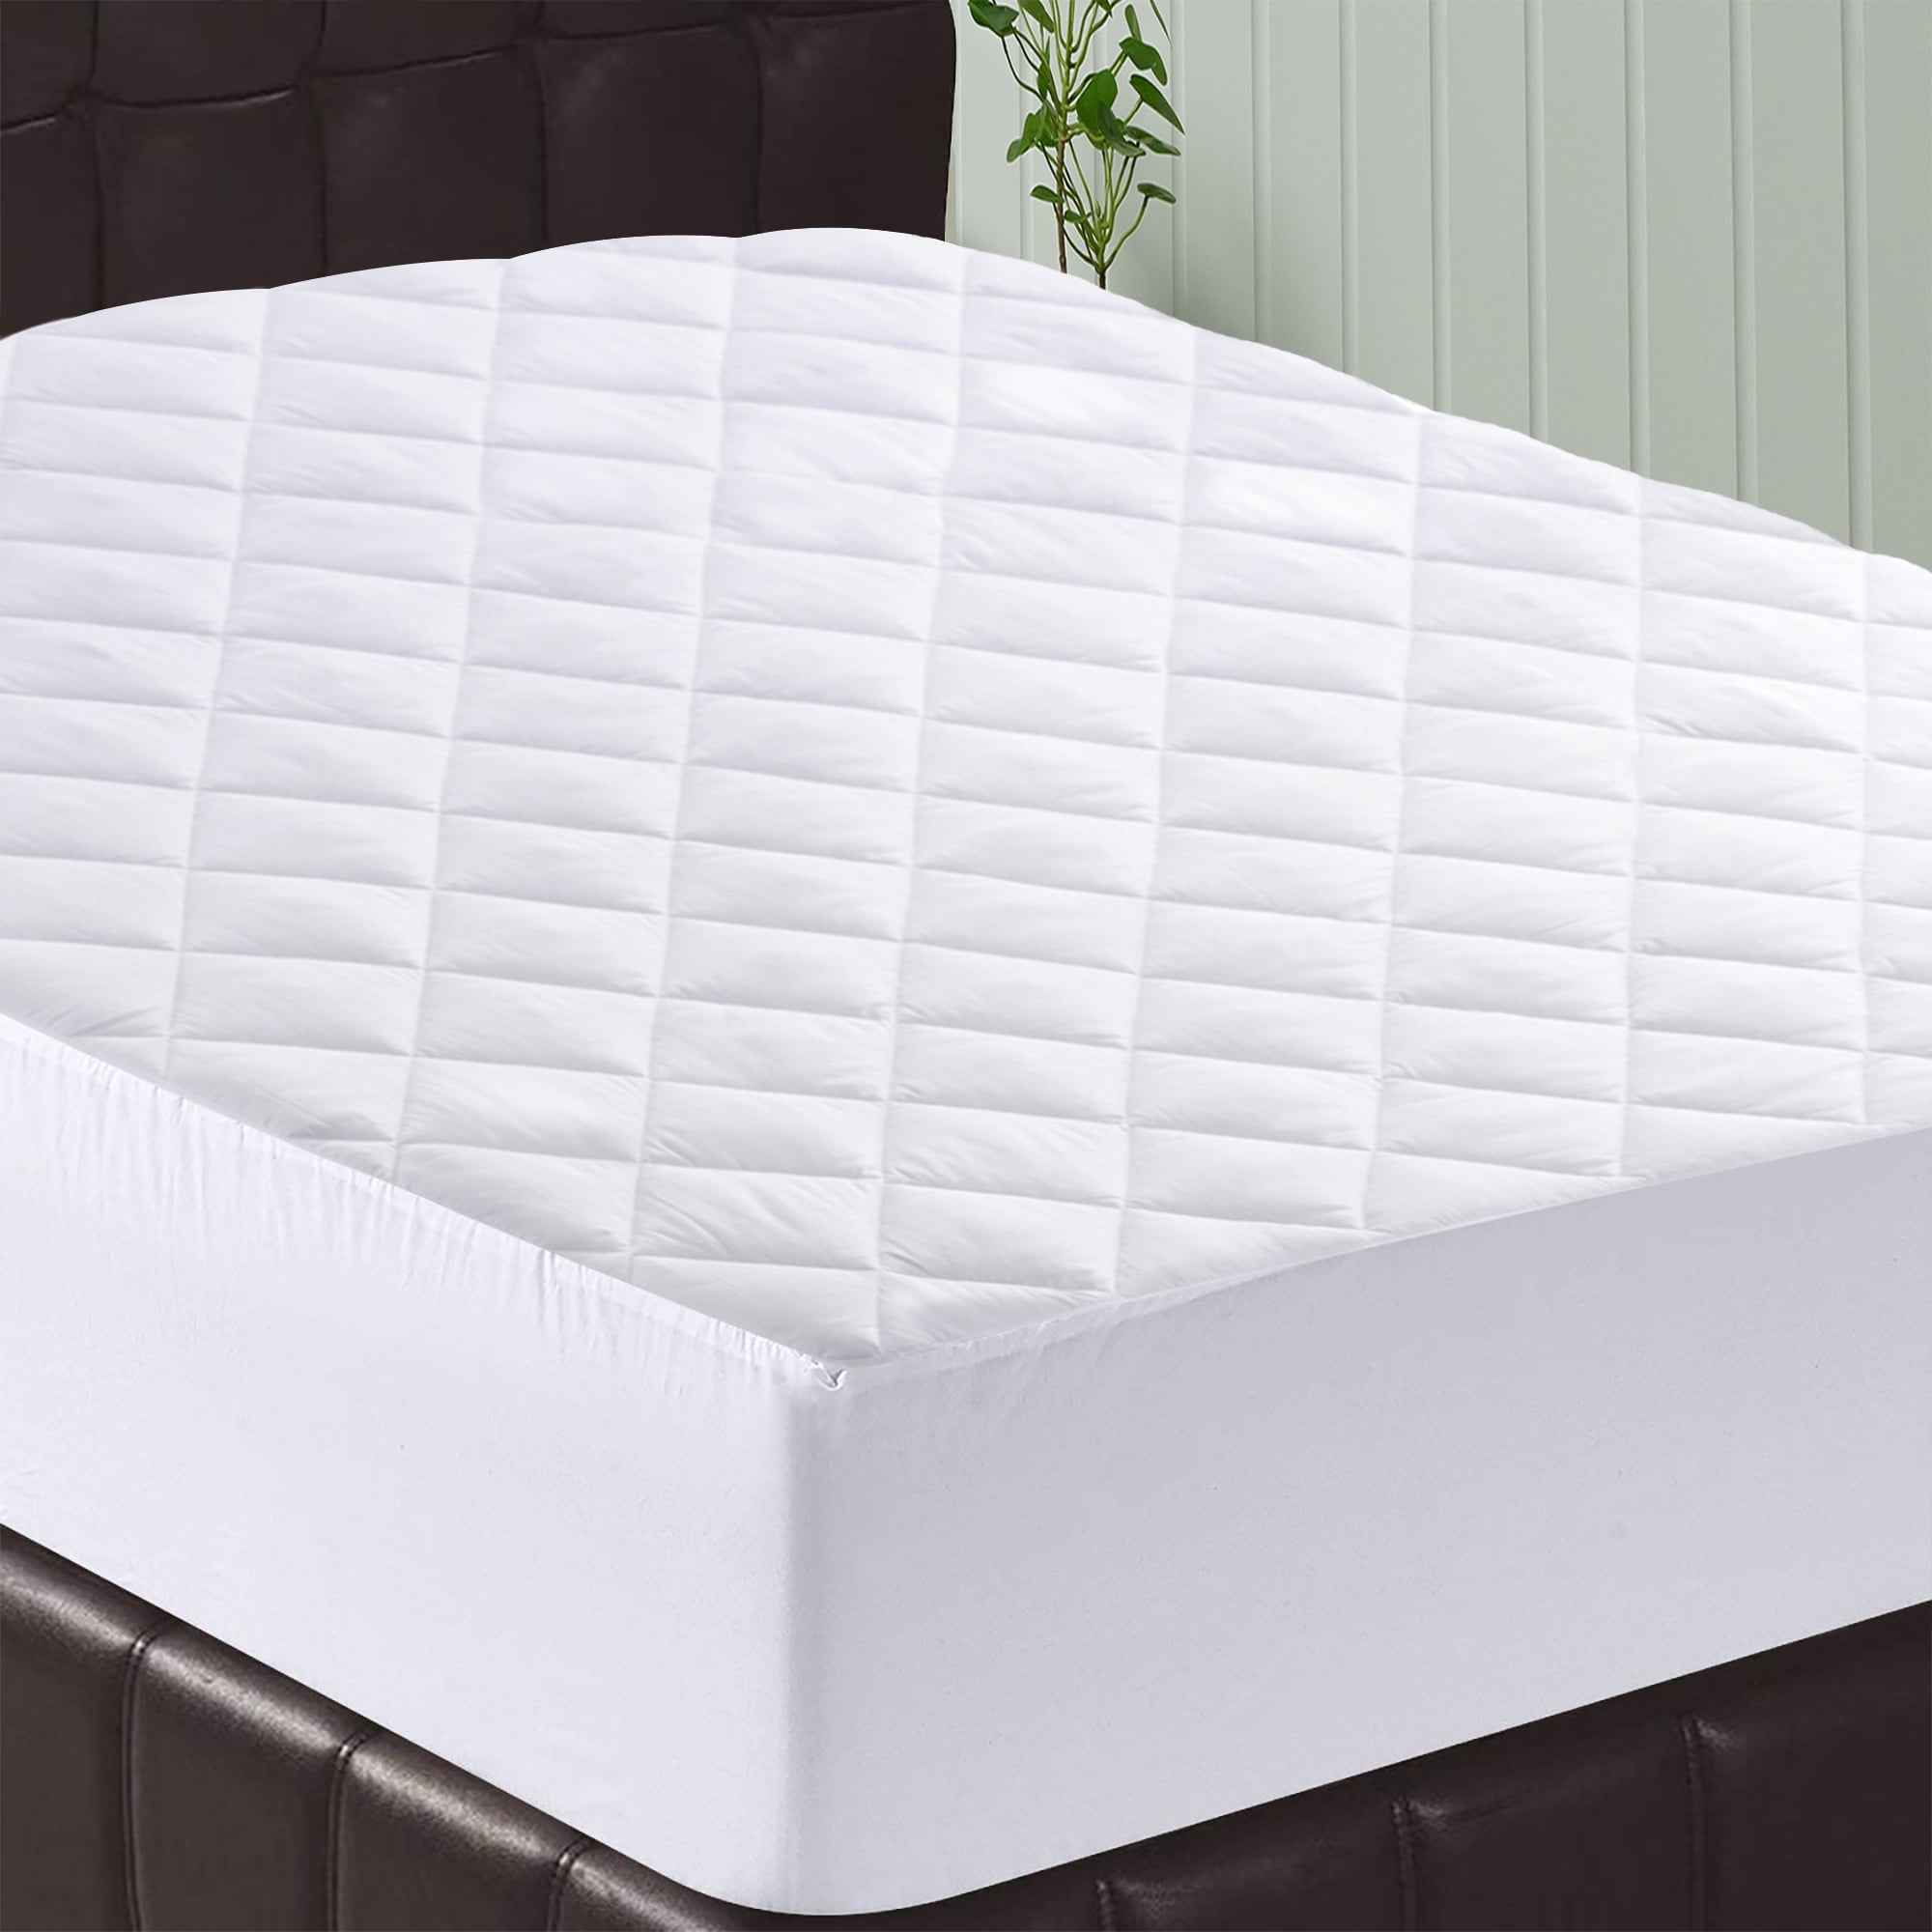 1 new bedding bedroom quilted fitted mattress pad cover full cotton polyester 